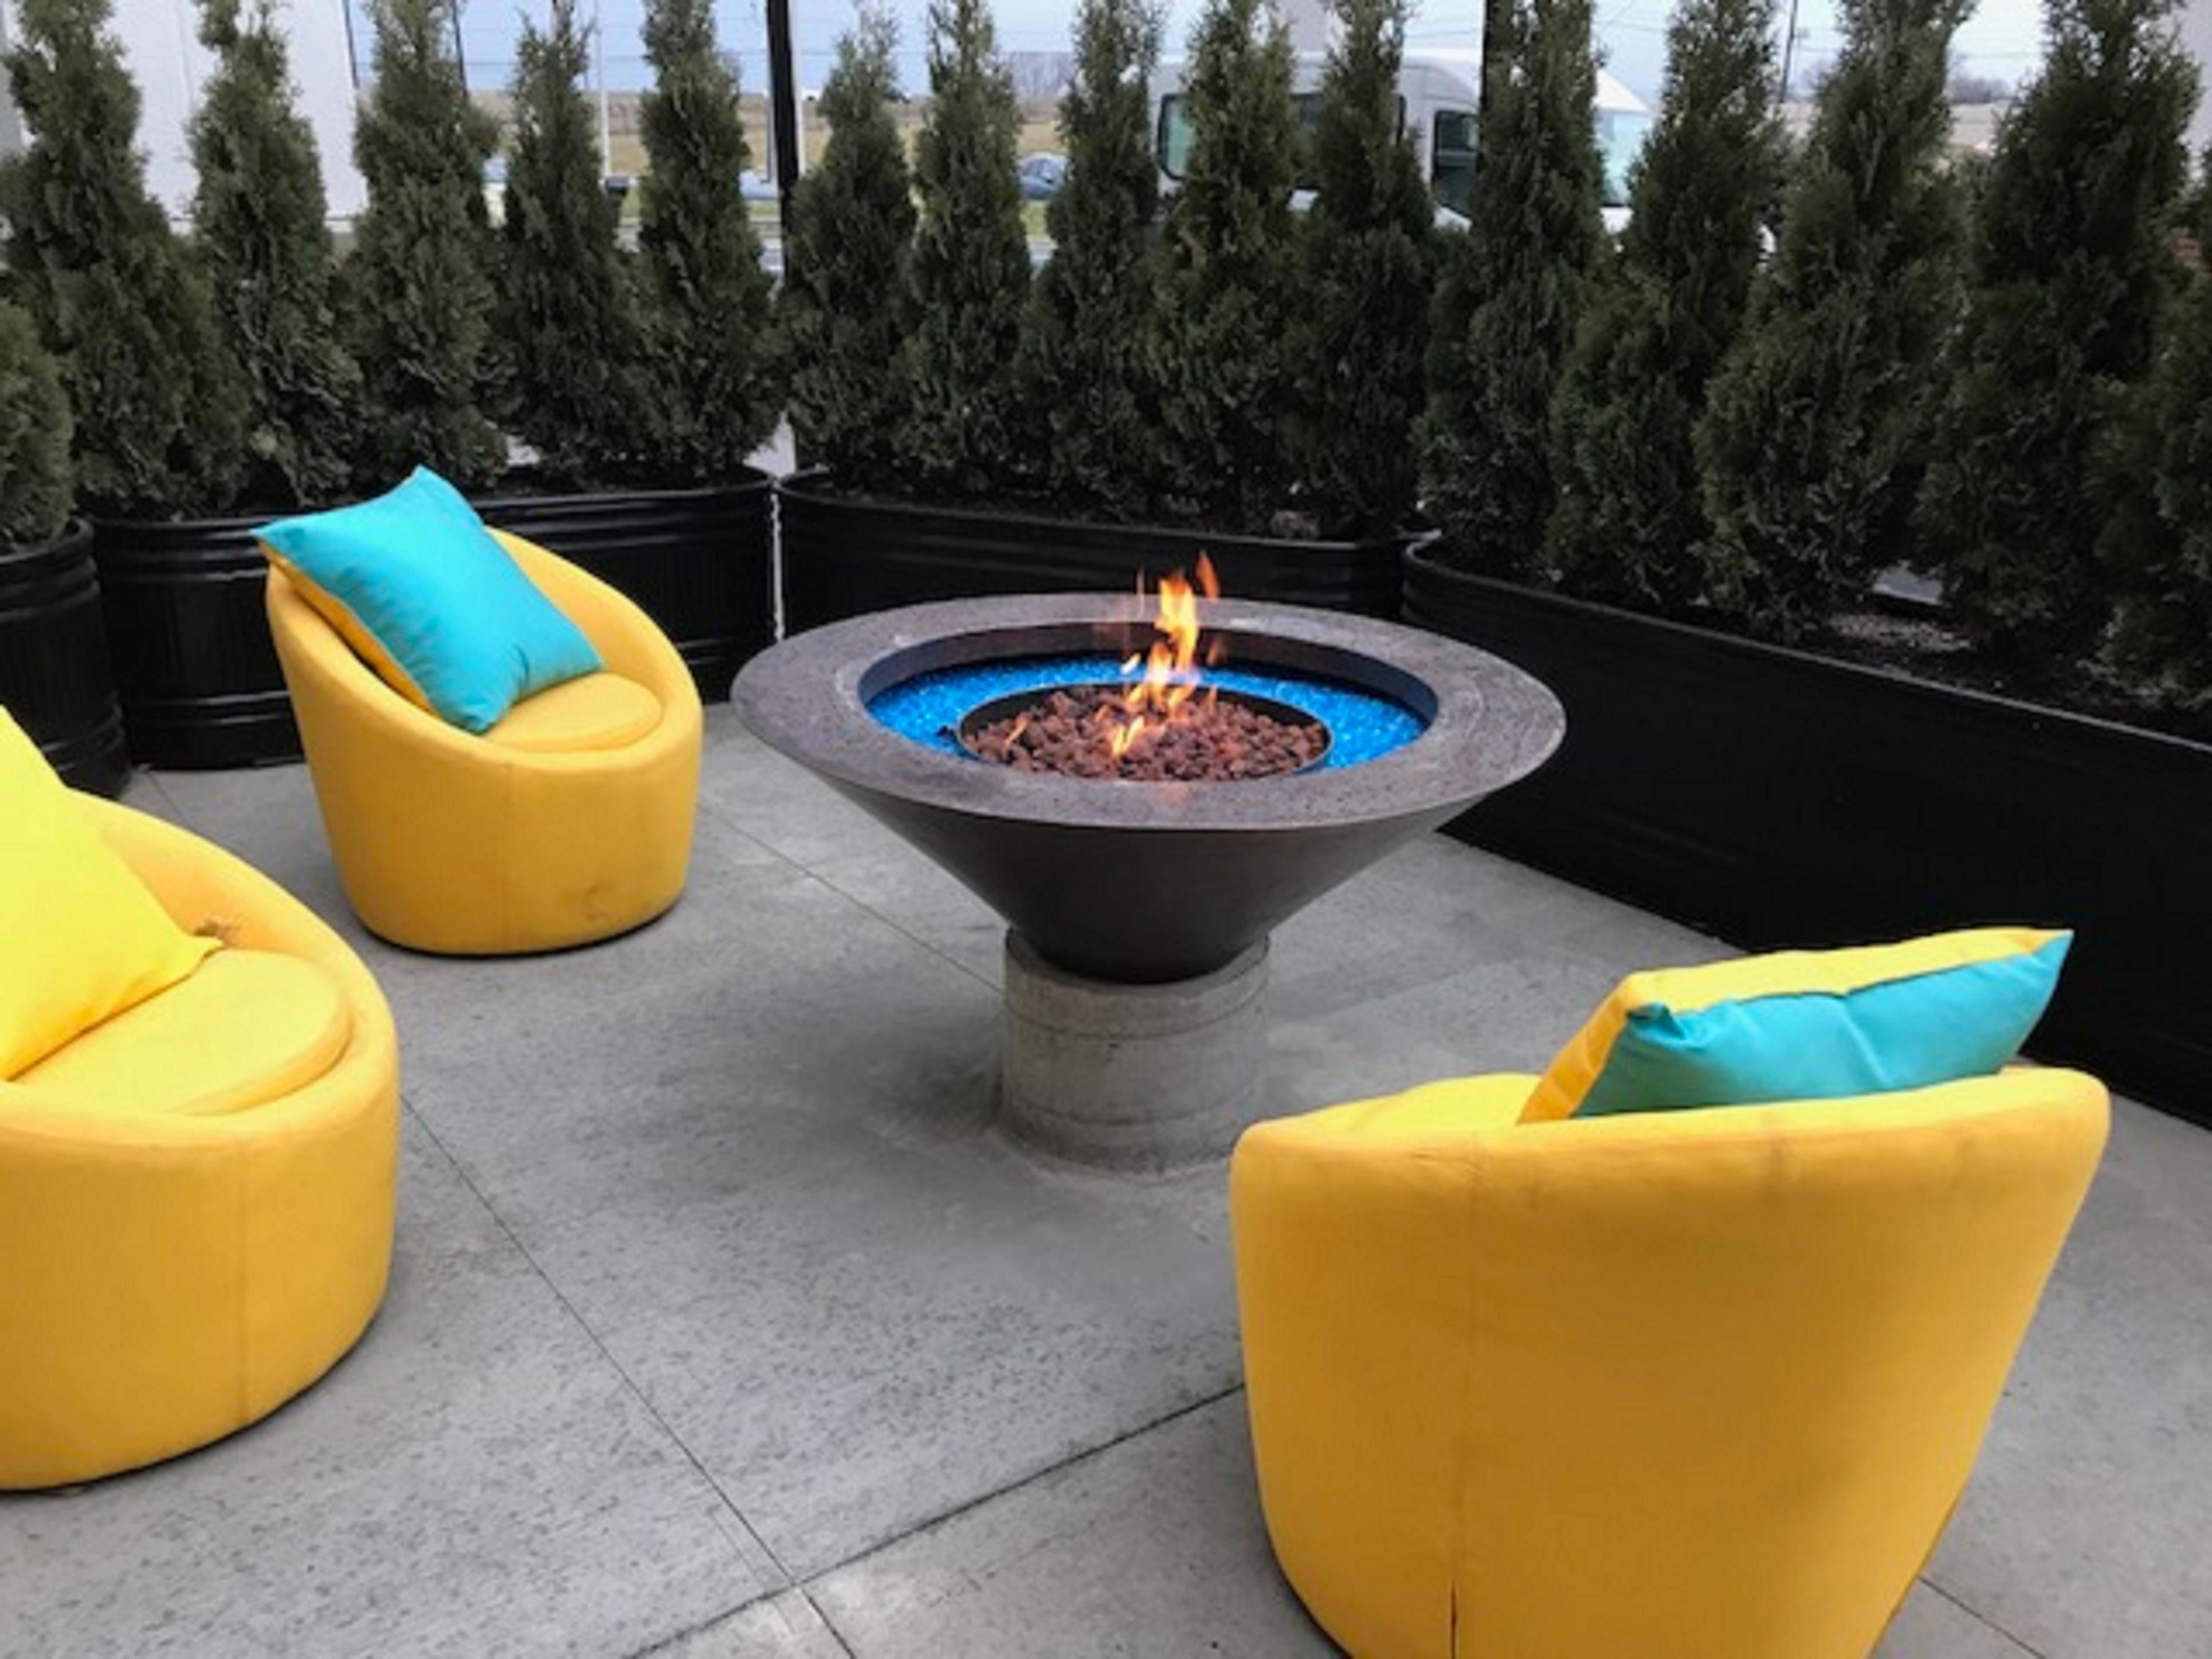 Grab your favorite beverage and cozy up around the fire! Our modern outdoor firepit and patio is located just outside our Media Room.  